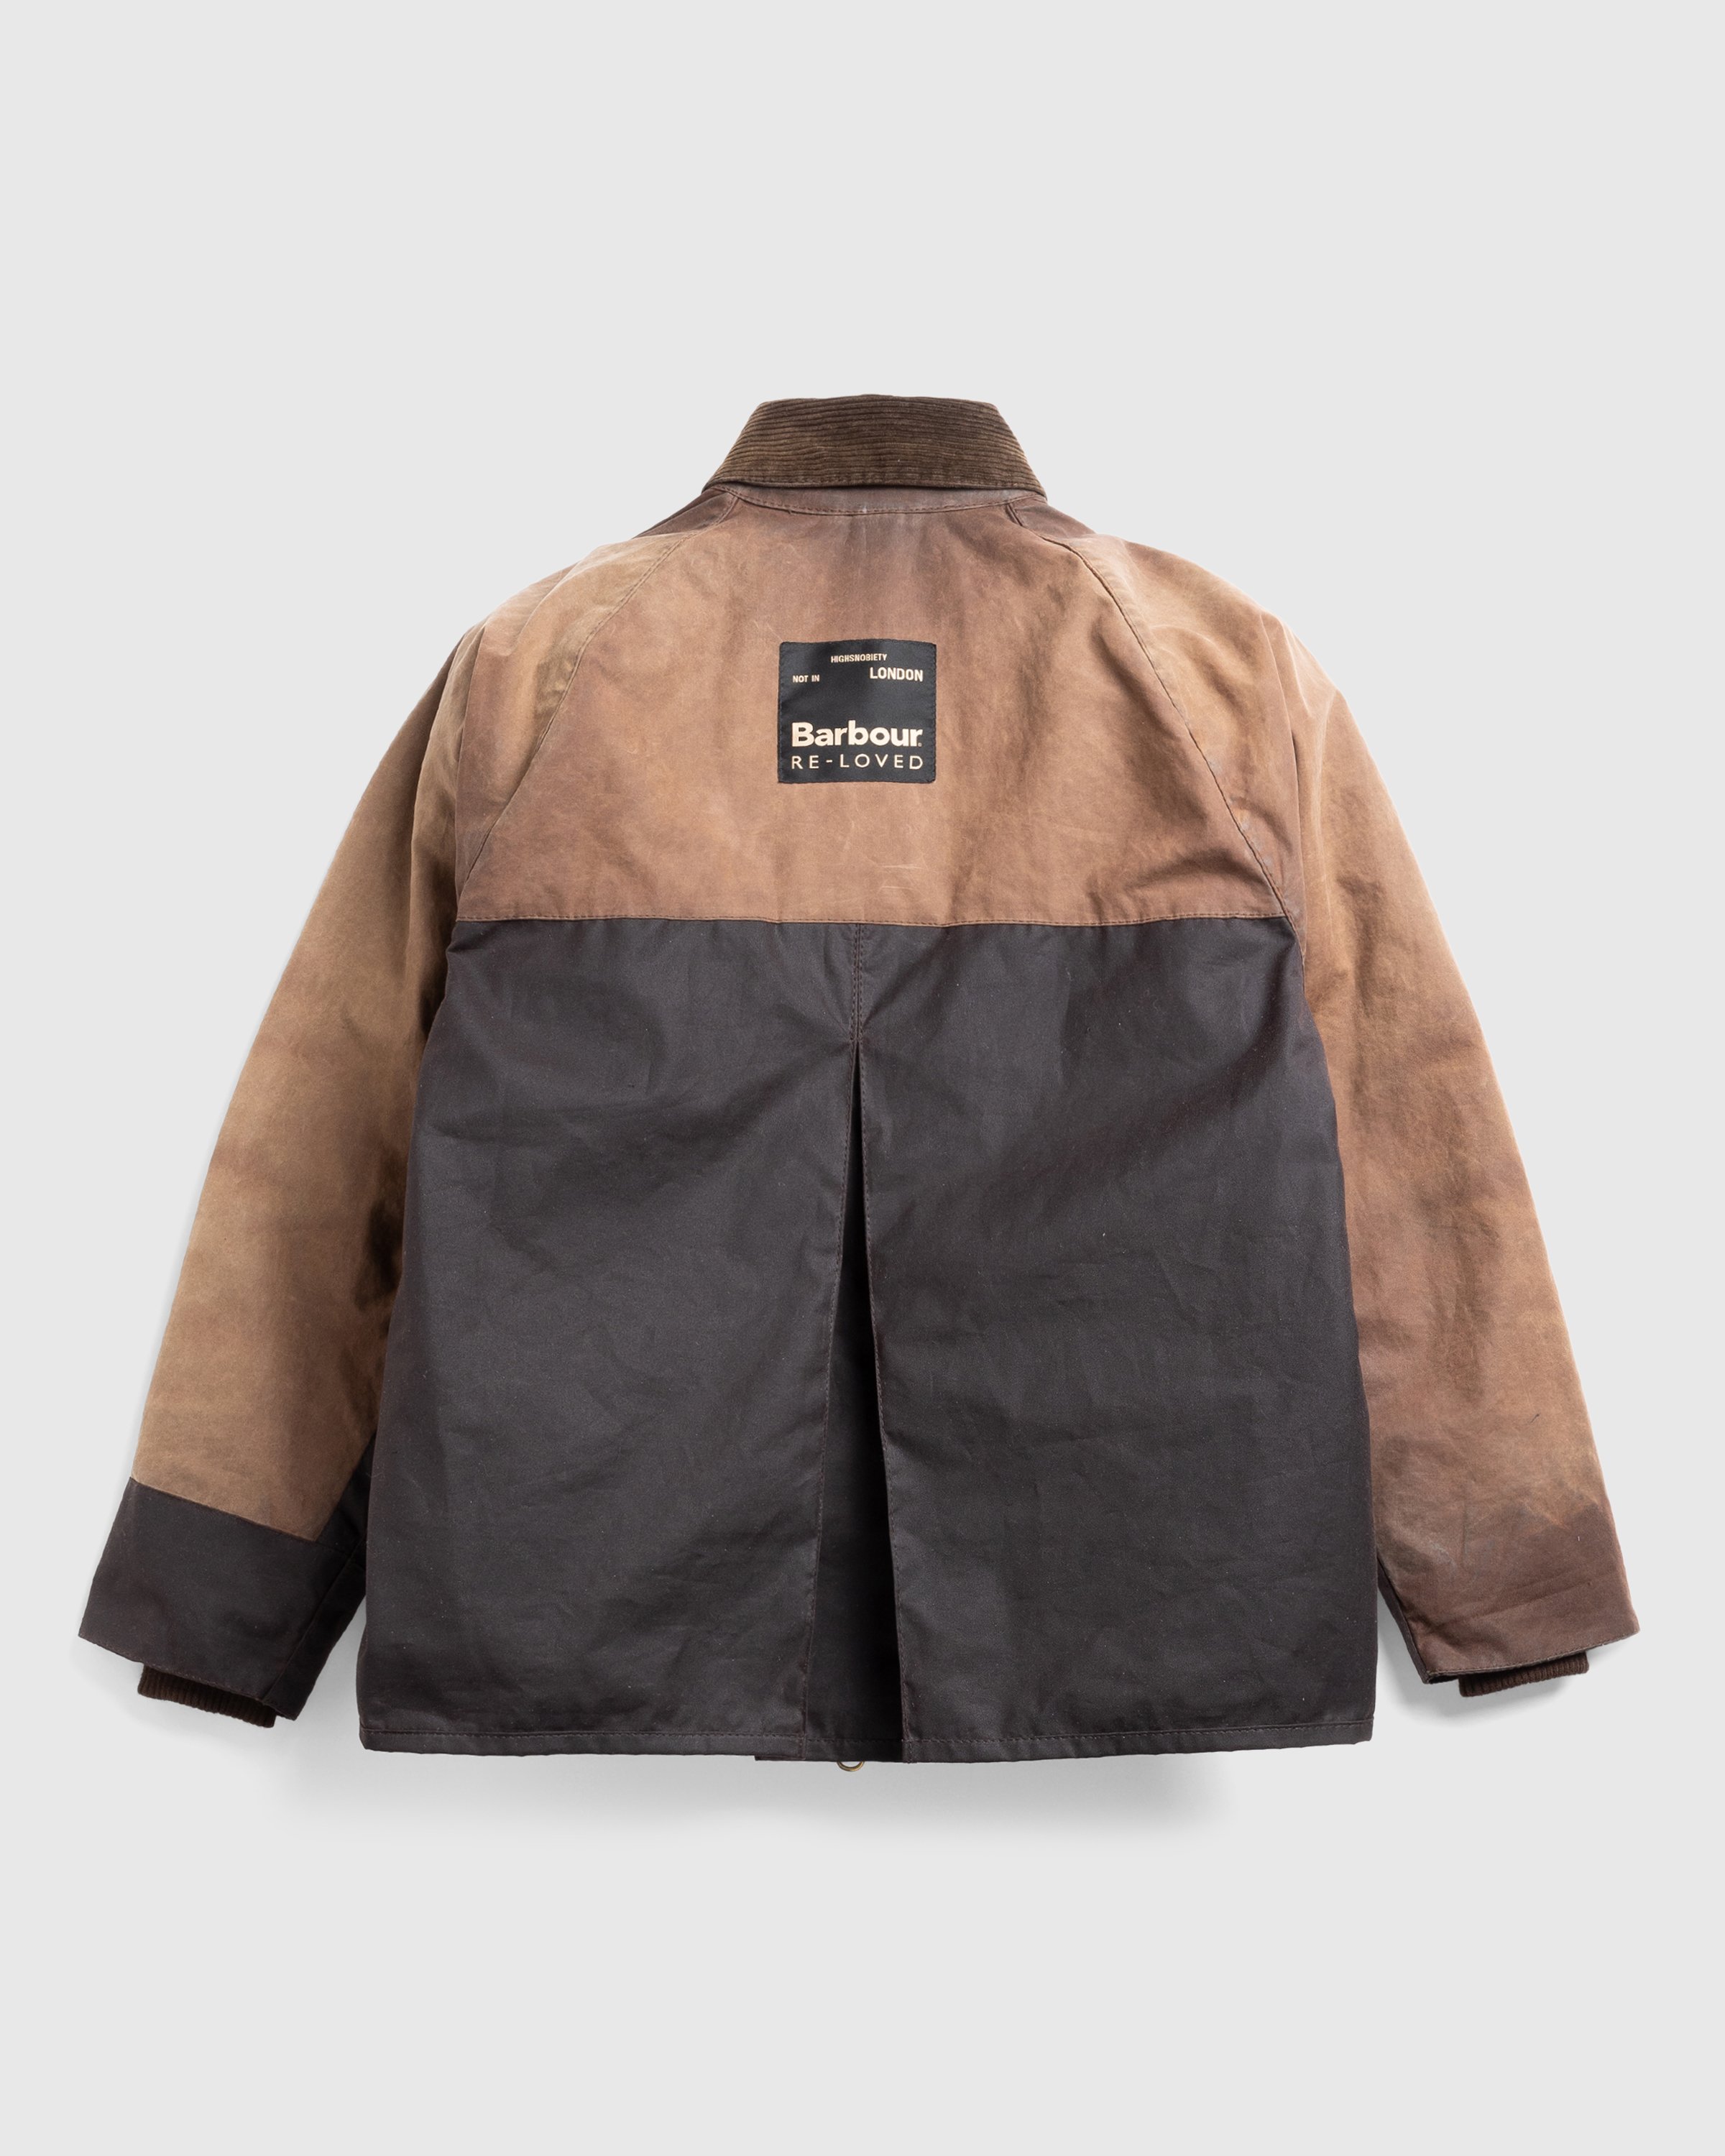 Barbour x Highsnobiety - Re-Loved Cropped Bedale Jacket 1 - 36 - Rusty-Brown - Clothing -  - Image 2